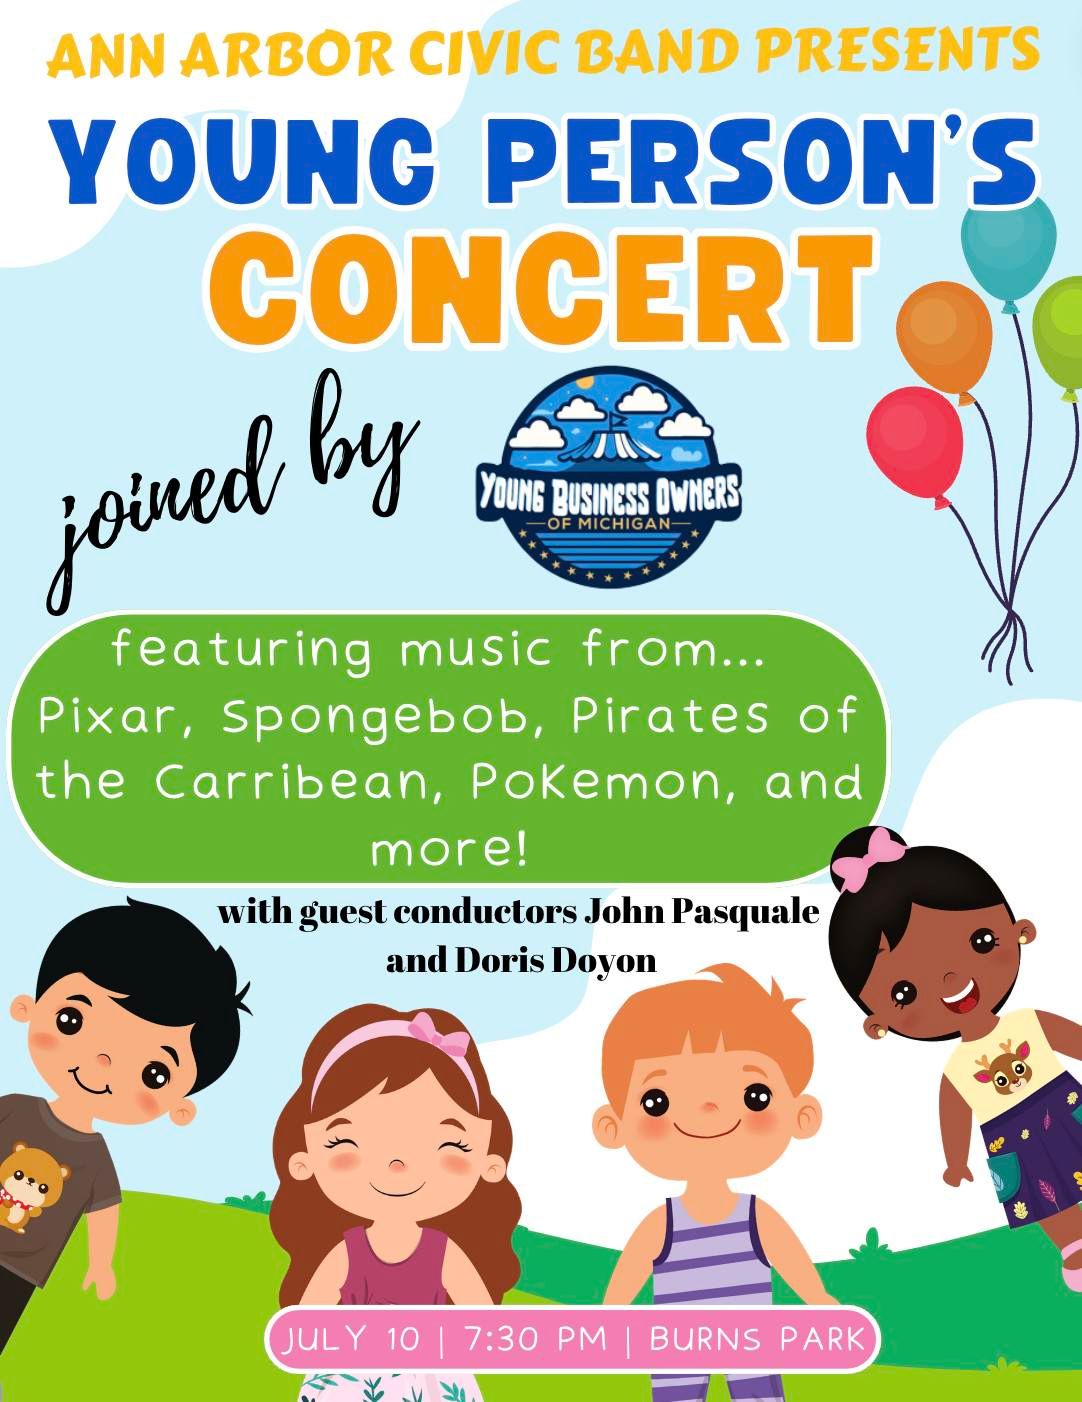 Young Person's Concert!